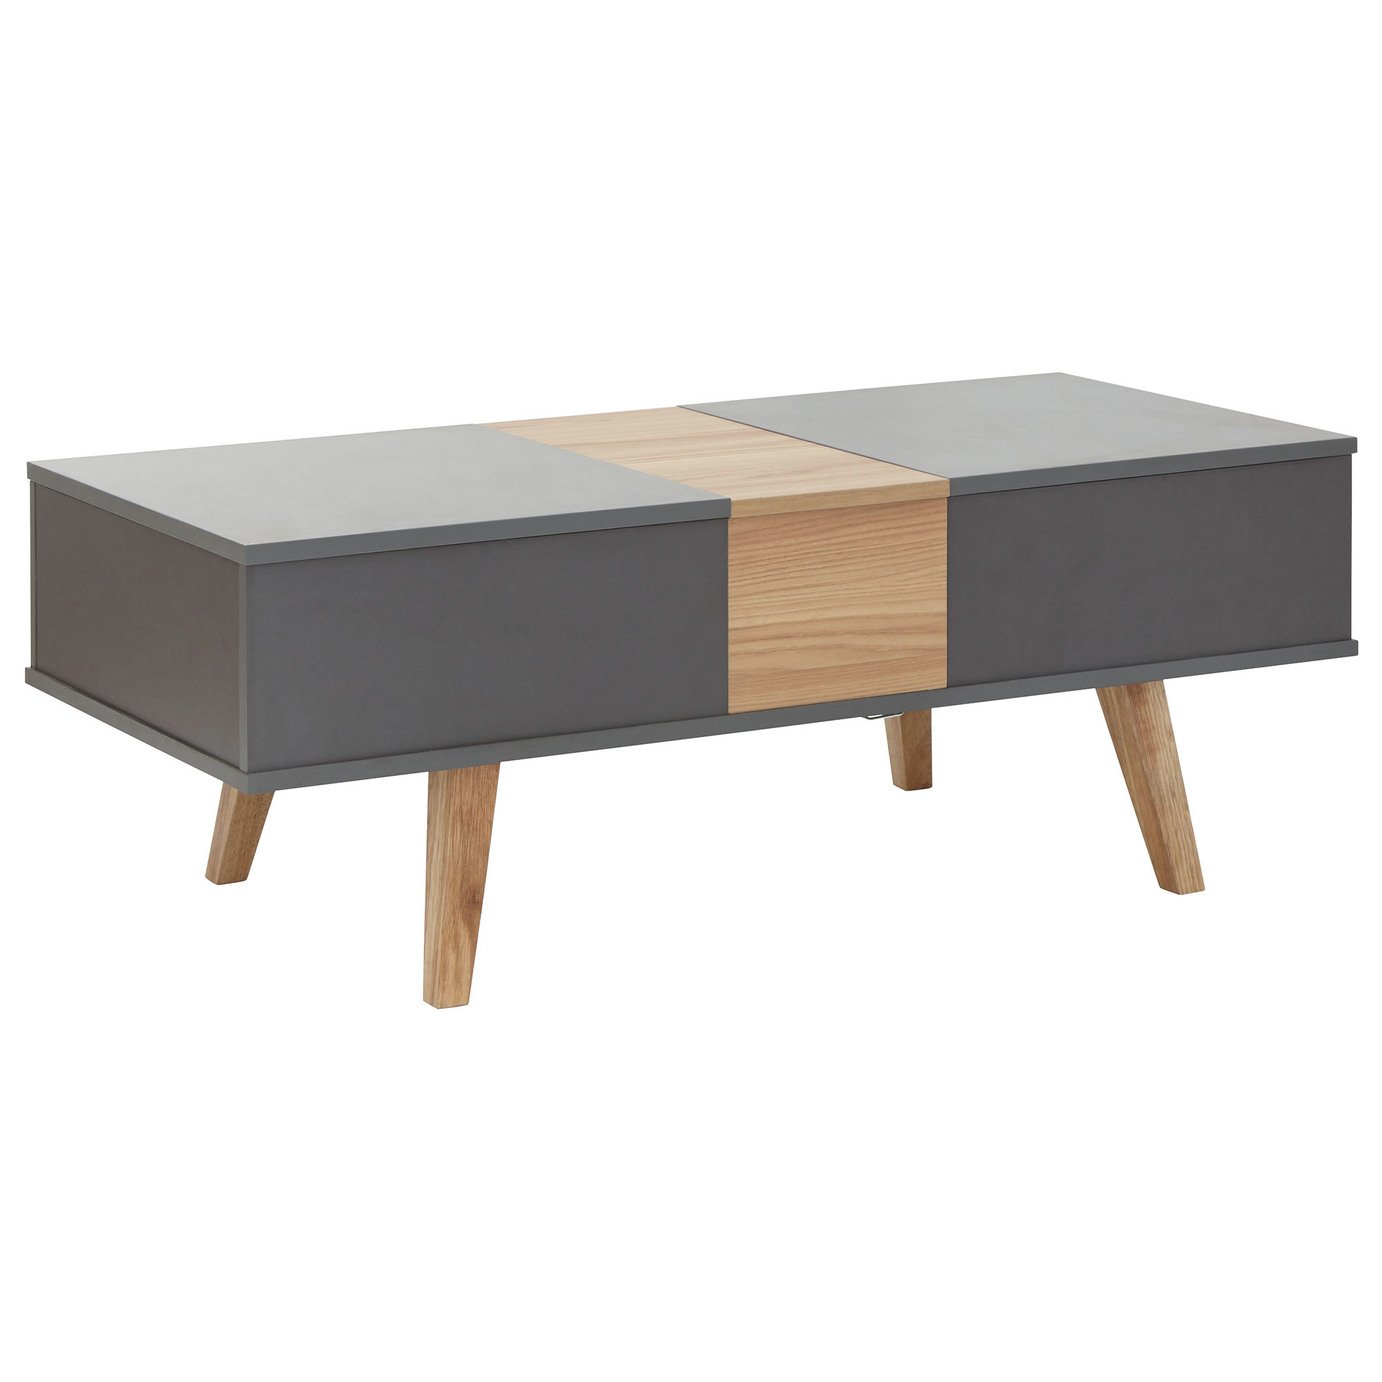 Modena Double Lifting Coffee Table - Grey